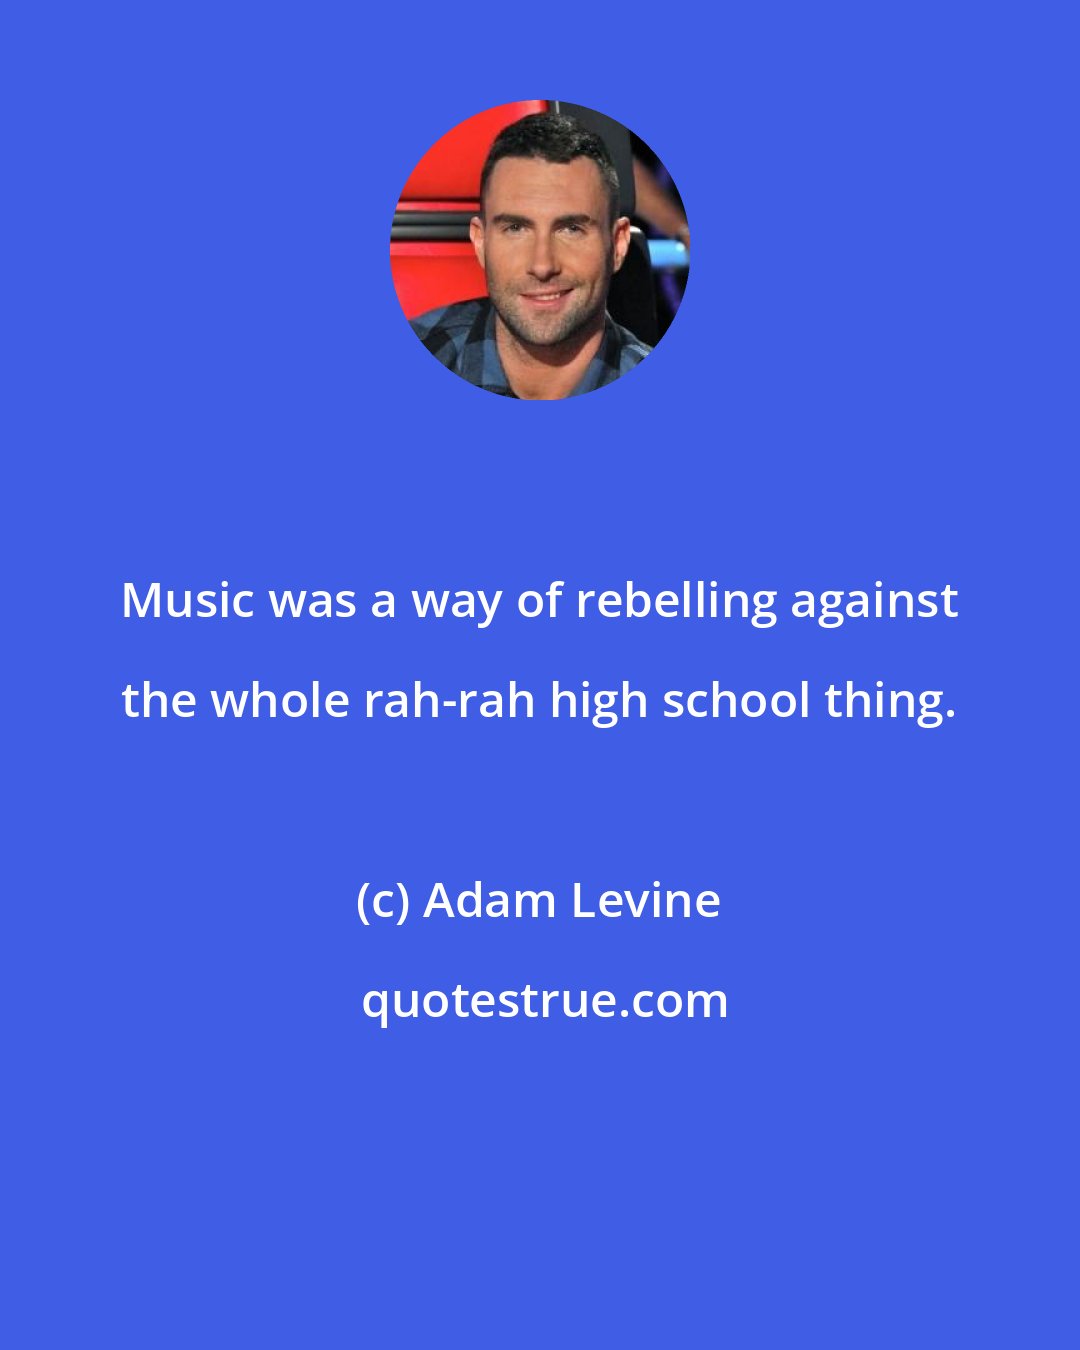 Adam Levine: Music was a way of rebelling against the whole rah-rah high school thing.